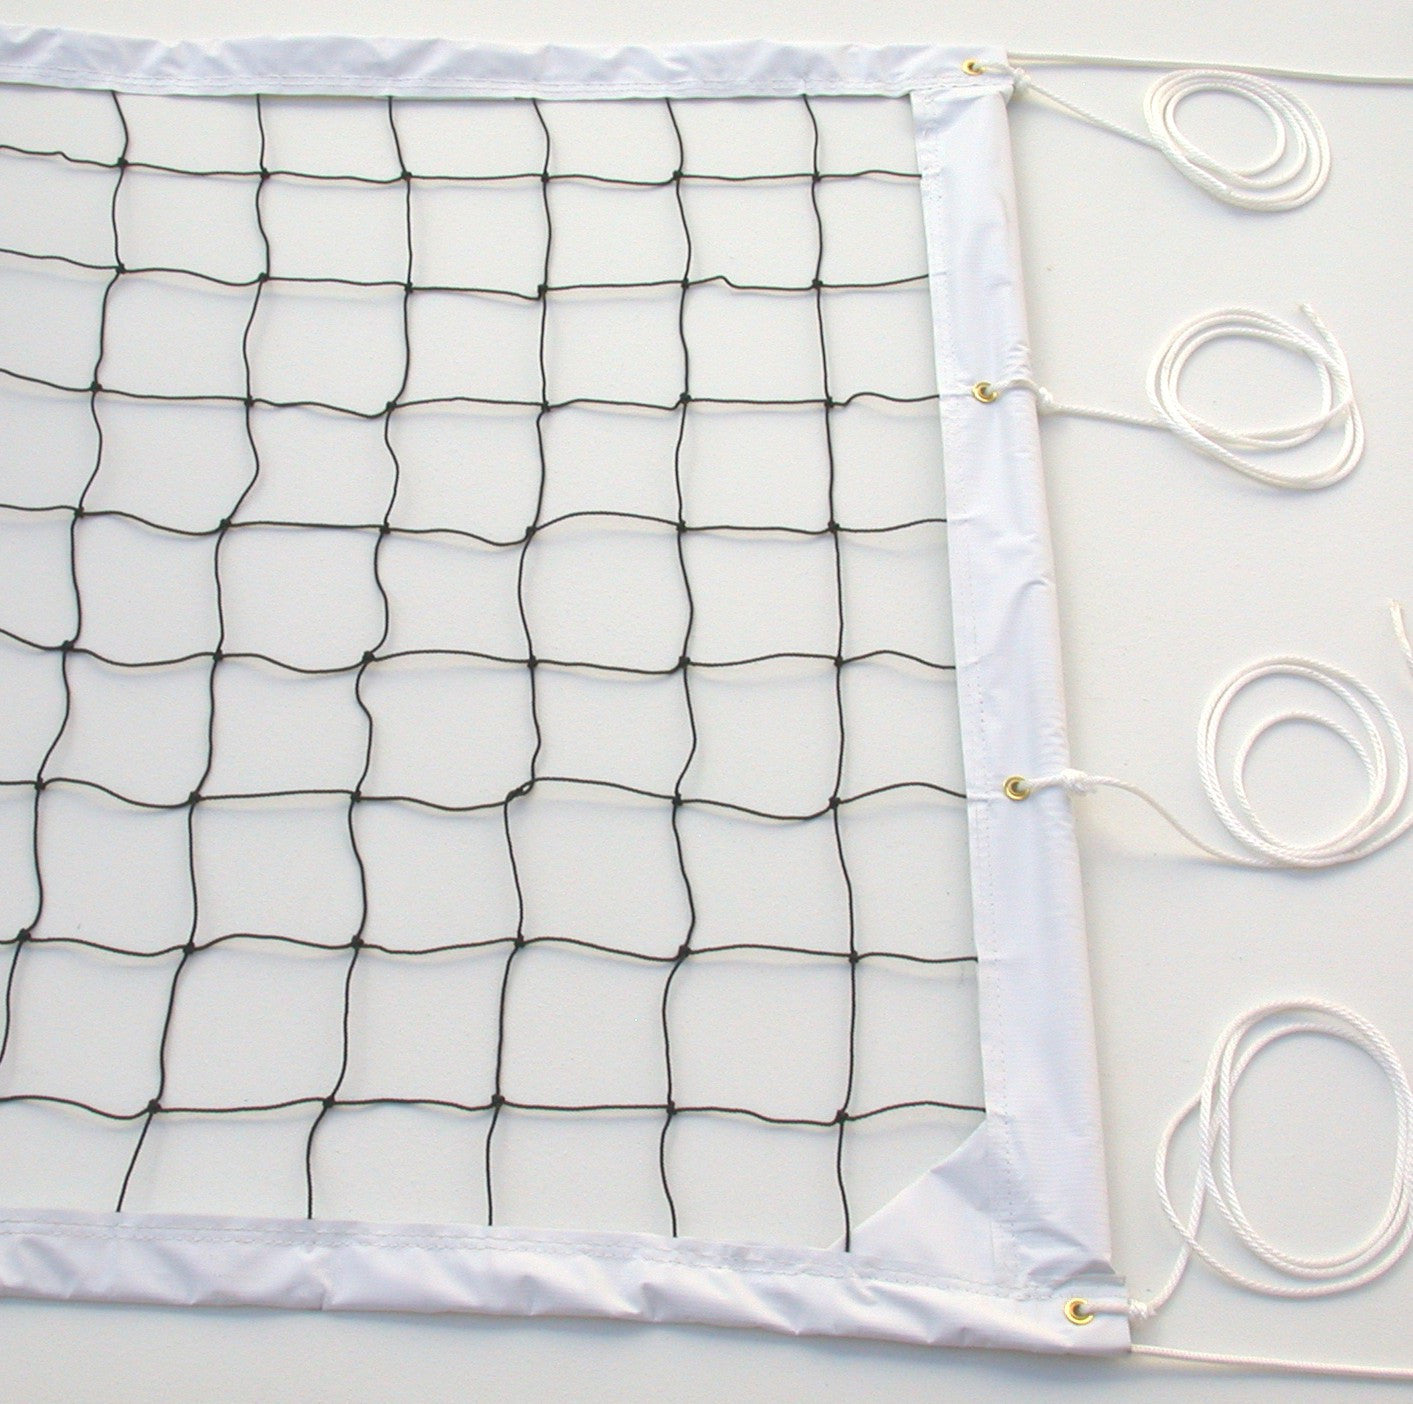 KNKW-Power Pro Volleyball Net Kevlar Rope White Tapes